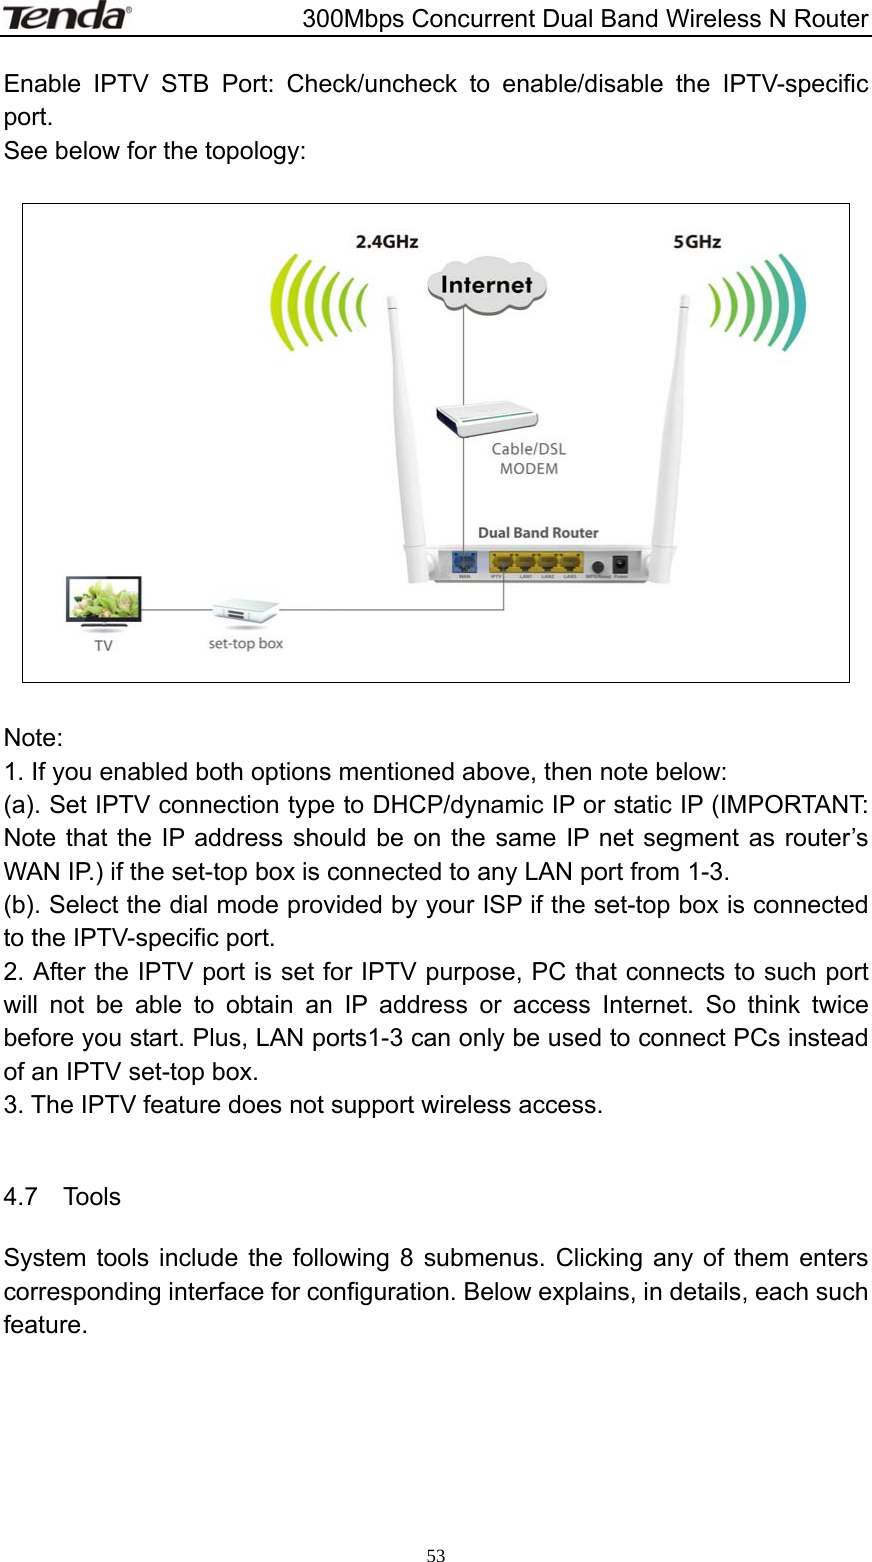                       300Mbps Concurrent Dual Band Wireless N Router  53Enable IPTV STB Port: Check/uncheck to enable/disable the IPTV-specific port. See below for the topology:    Note: 1. If you enabled both options mentioned above, then note below:   (a). Set IPTV connection type to DHCP/dynamic IP or static IP (IMPORTANT: Note that the IP address should be on the same IP net segment as router’s WAN IP.) if the set-top box is connected to any LAN port from 1-3. (b). Select the dial mode provided by your ISP if the set-top box is connected to the IPTV-specific port.     2. After the IPTV port is set for IPTV purpose, PC that connects to such port will not be able to obtain an IP address or access Internet. So think twice before you start. Plus, LAN ports1-3 can only be used to connect PCs instead of an IPTV set-top box. 3. The IPTV feature does not support wireless access.    4.7  Tools System tools include the following 8 submenus. Clicking any of them enters corresponding interface for configuration. Below explains, in details, each such feature. 